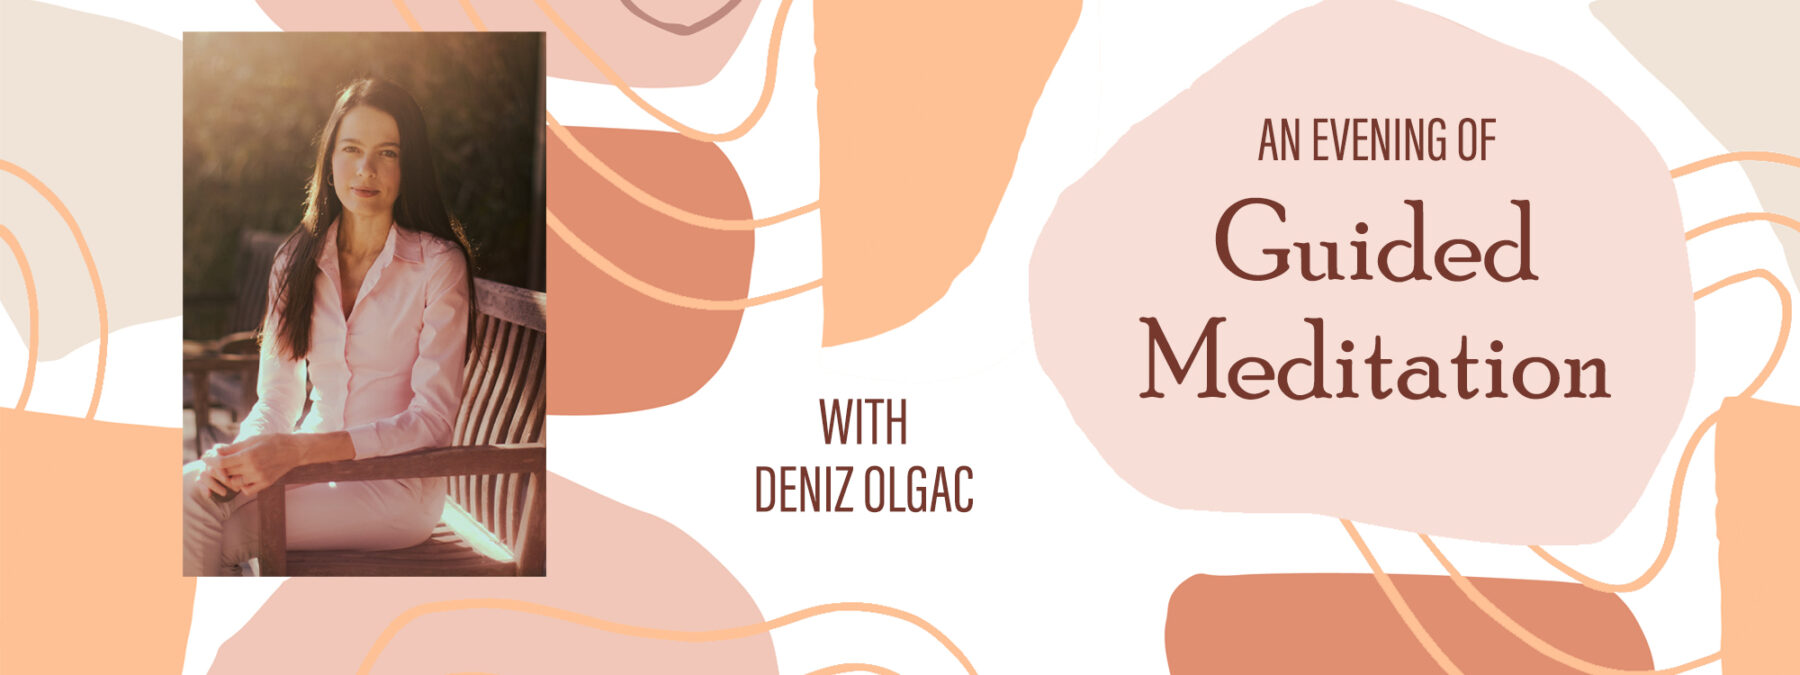 An evening of Guided Meditation with Deniz Olgac with portrait of Olgac on a colorful abstract background